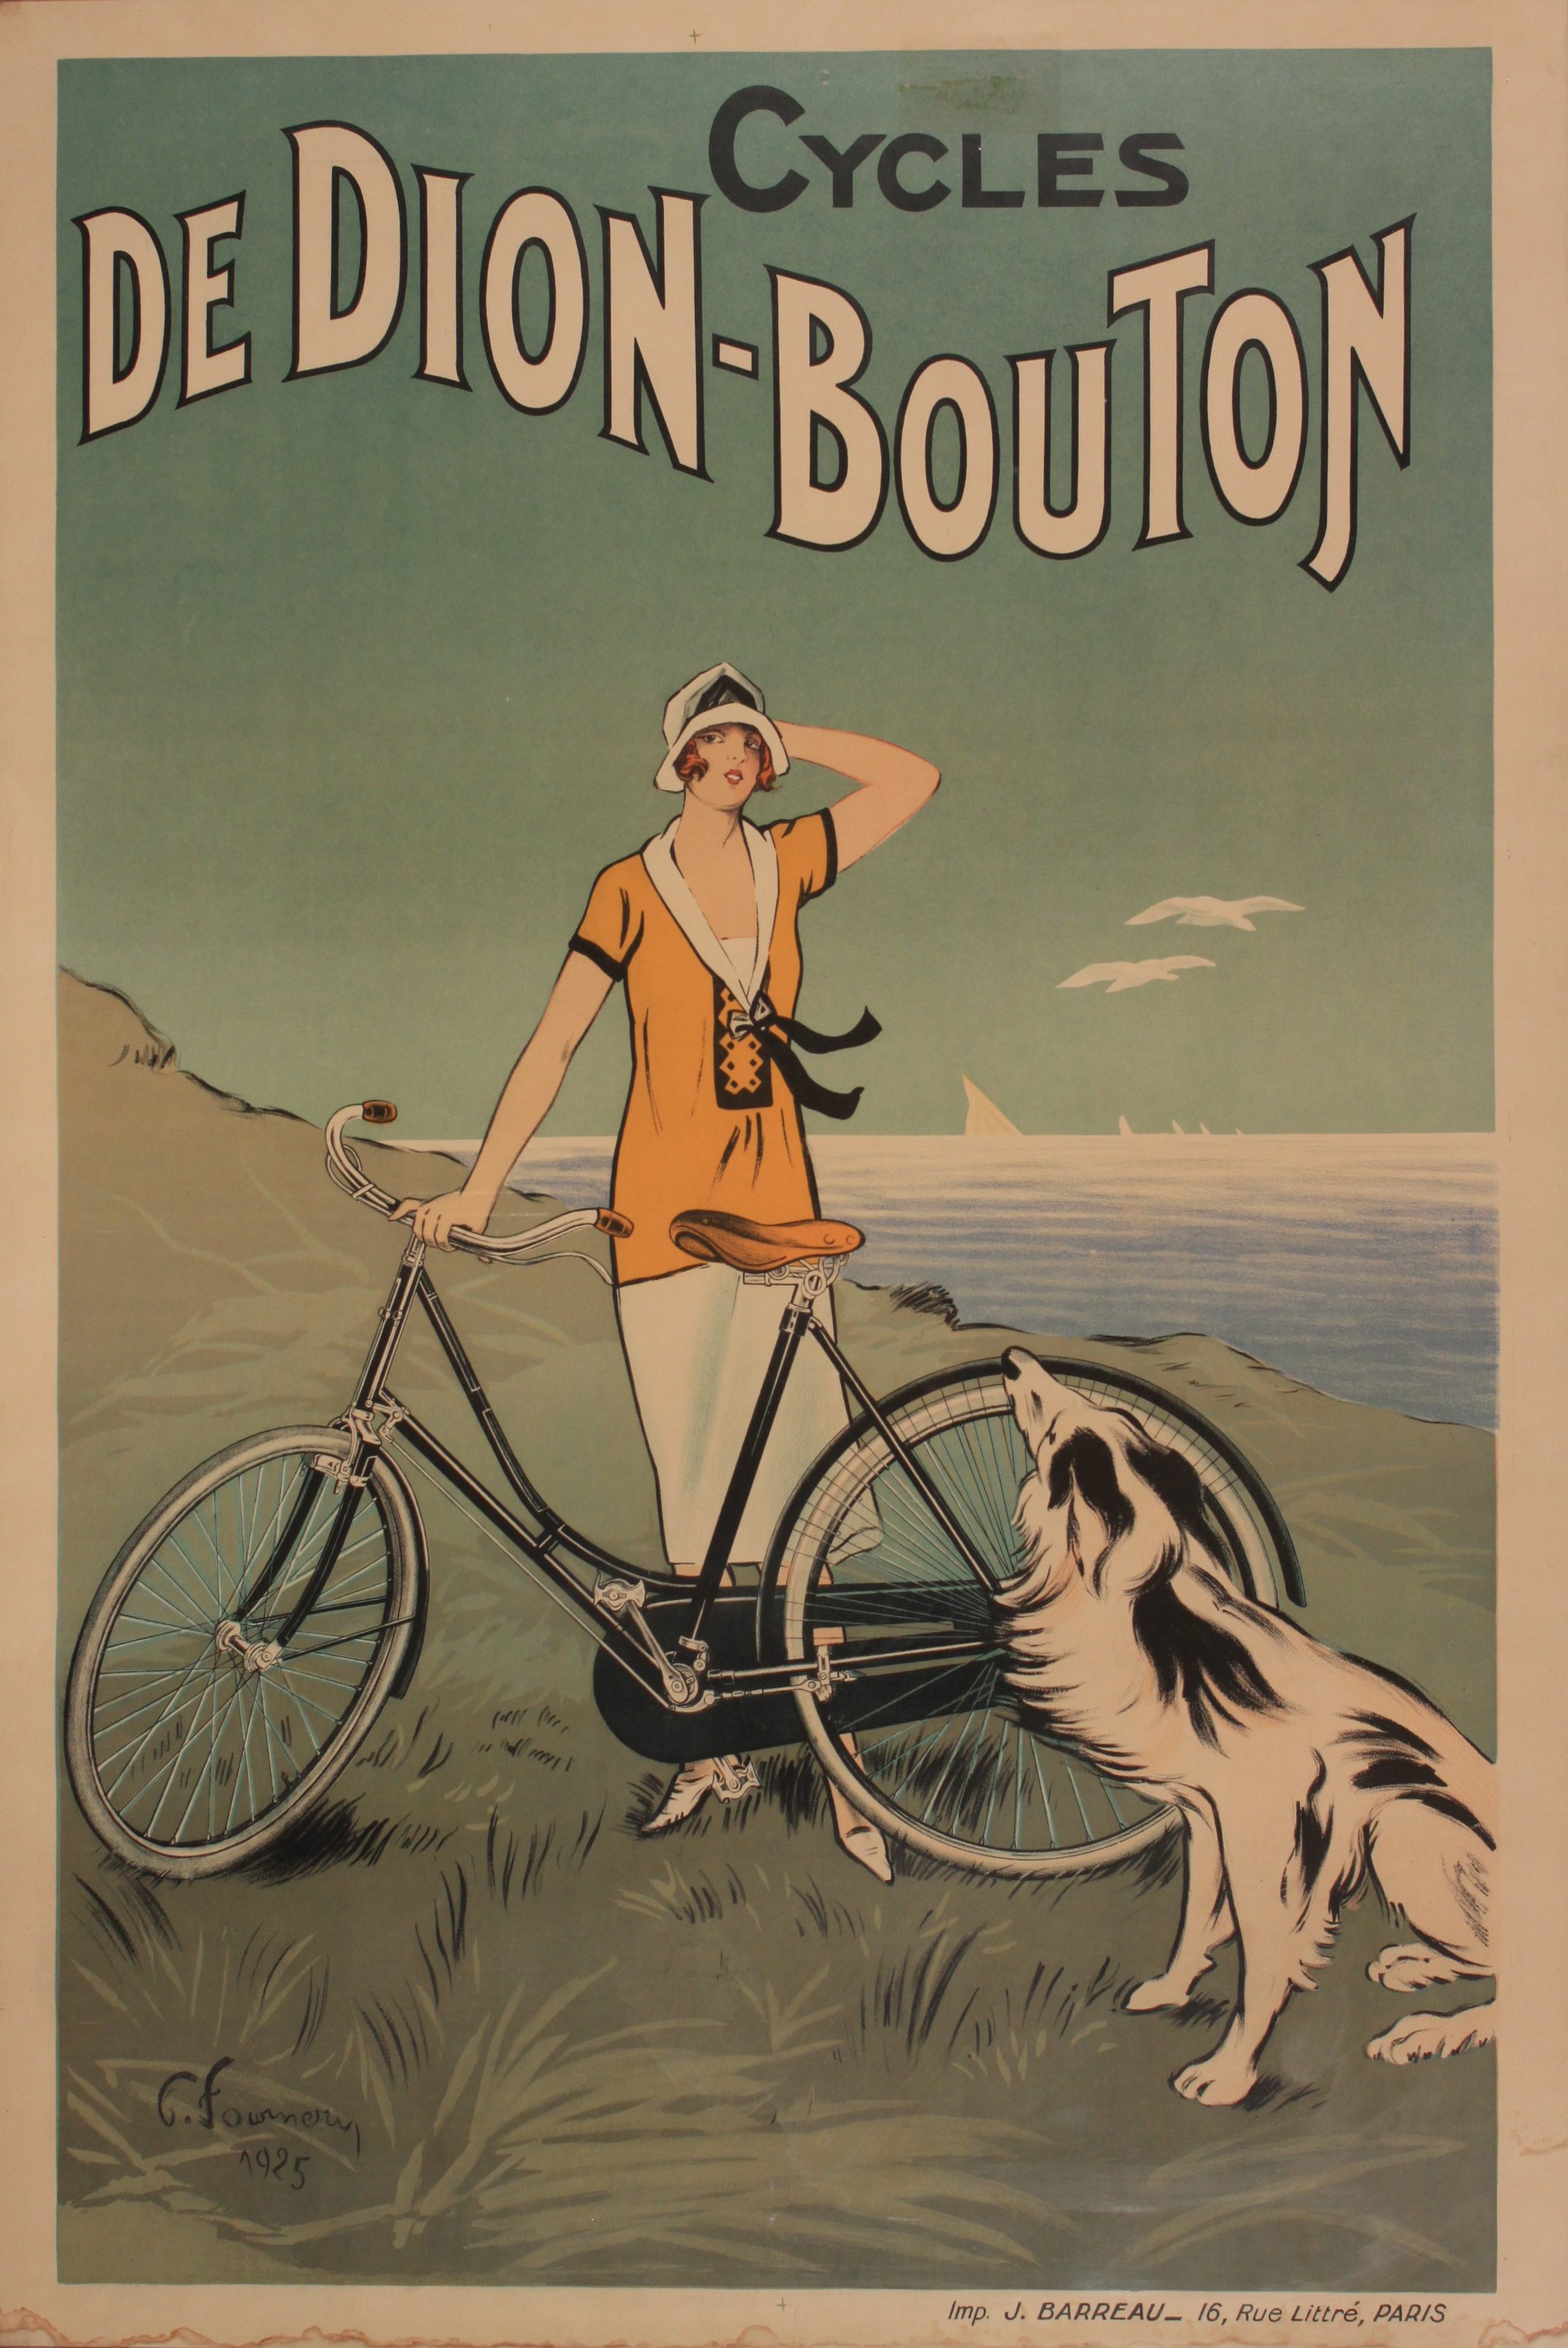 G Fournery (Felix 1865-1938) Cycles De Dion-Bouton, 1925. Onslows image